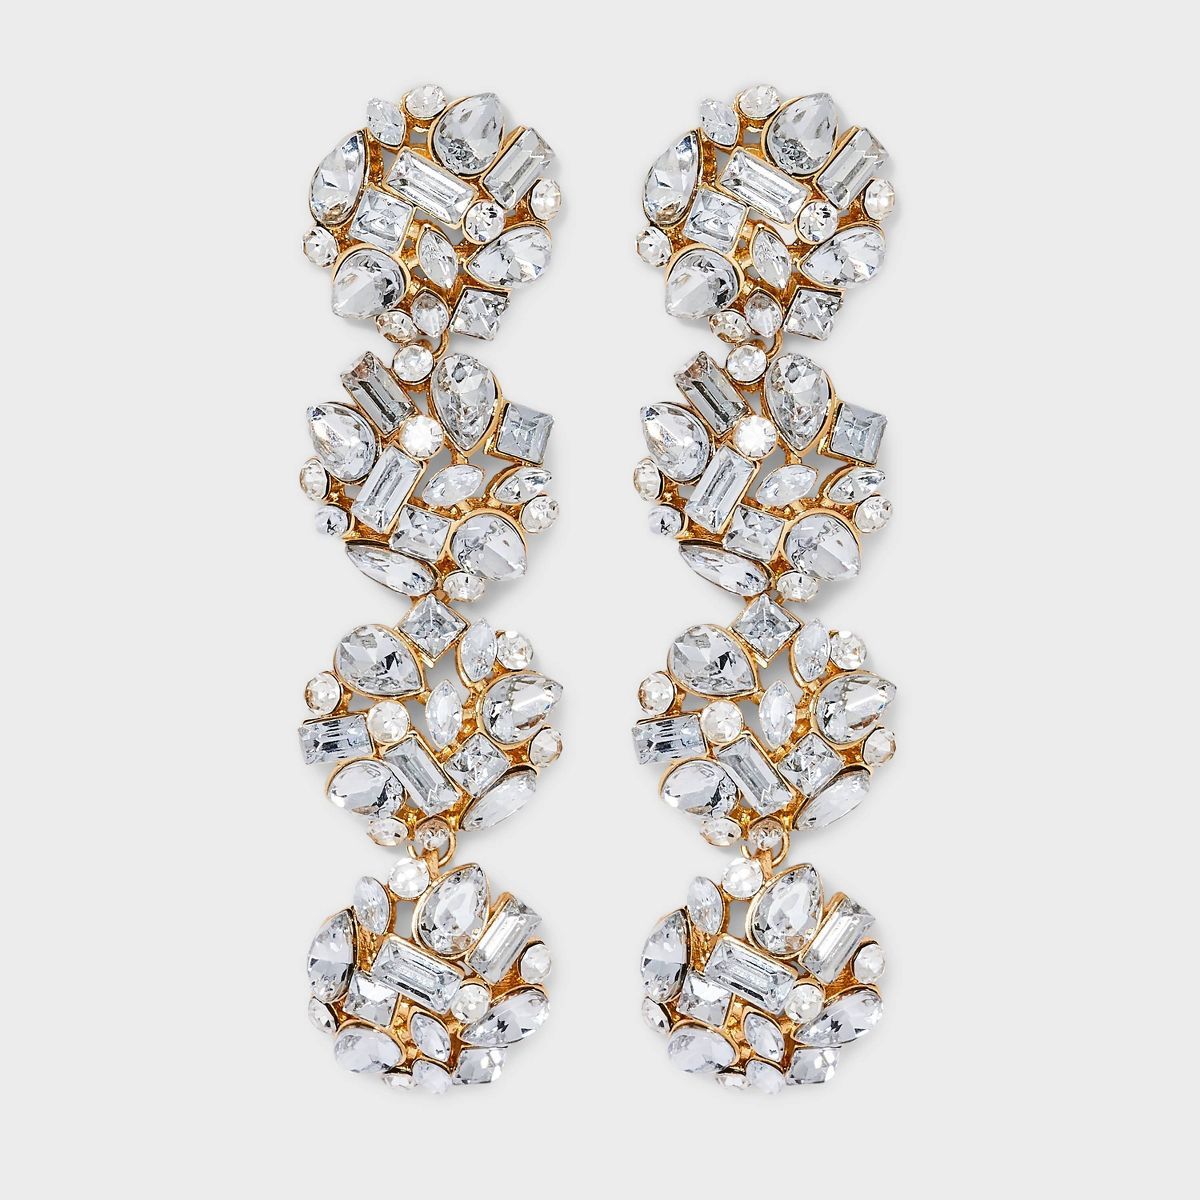 SUGARFIX by BaubleBar "Crystal Cluster" Statement Drop Earrings - Gold | Target